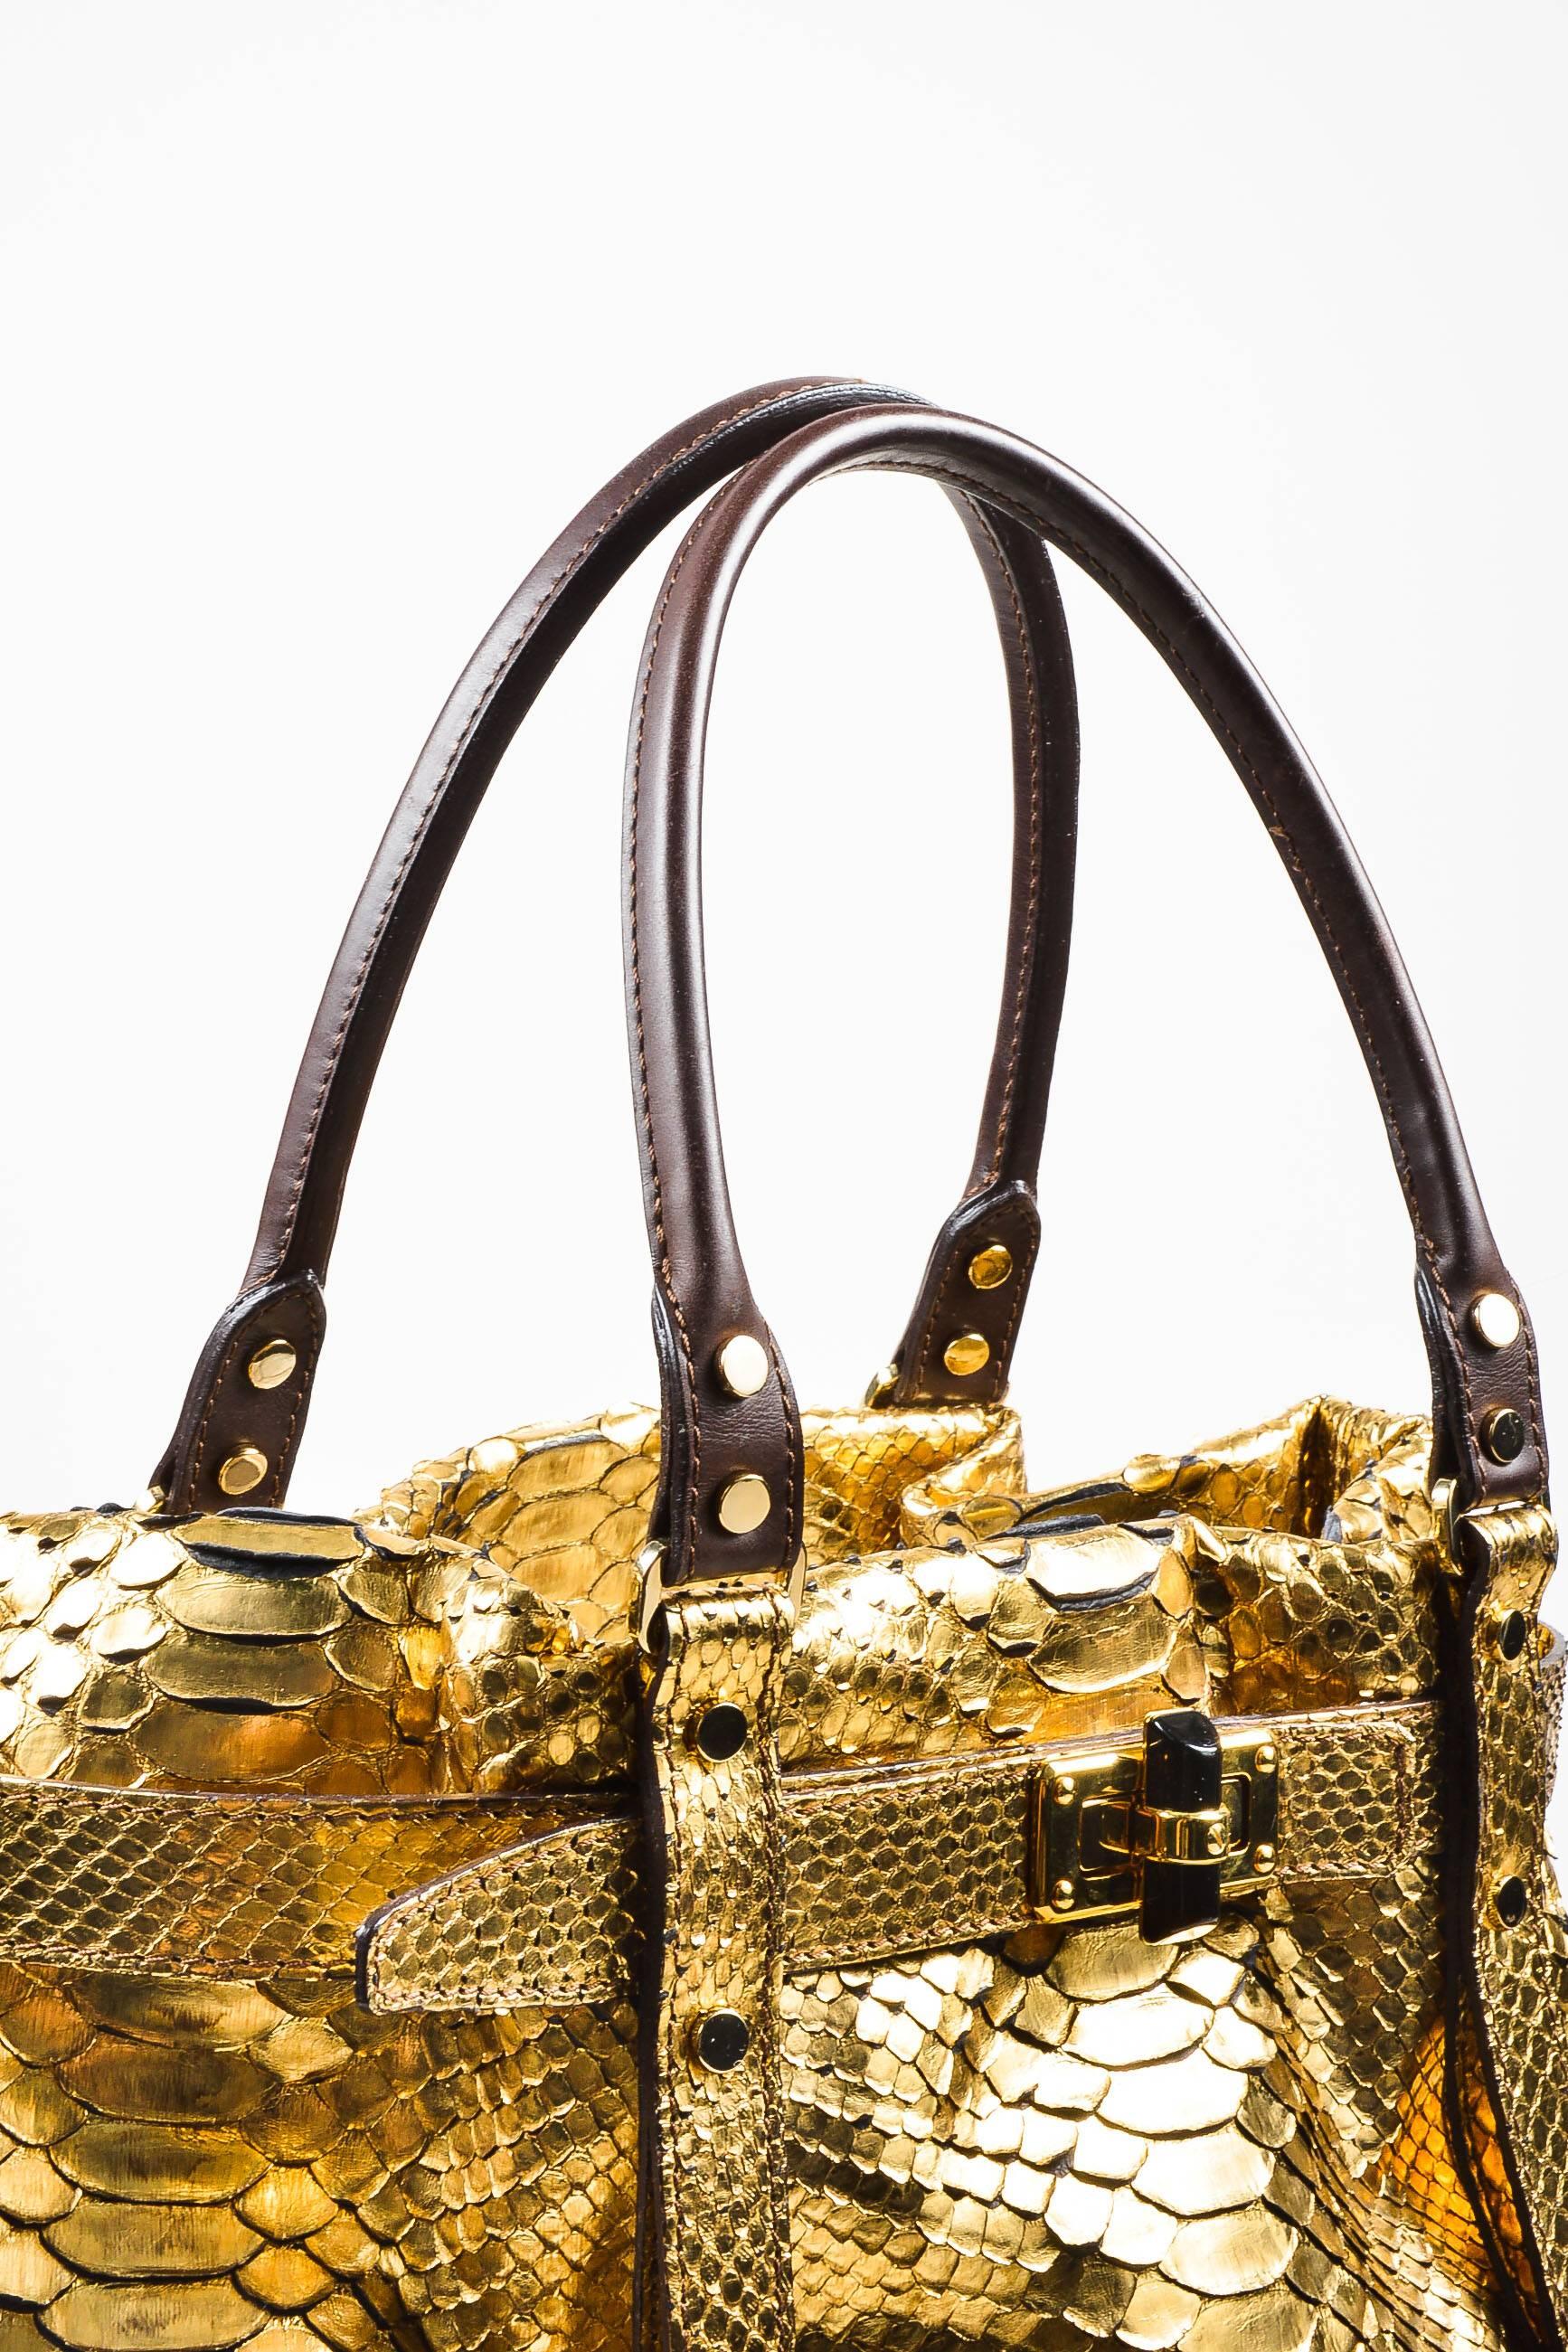 Lanvin New With Tag Metallic Gold Python Leather Trim 